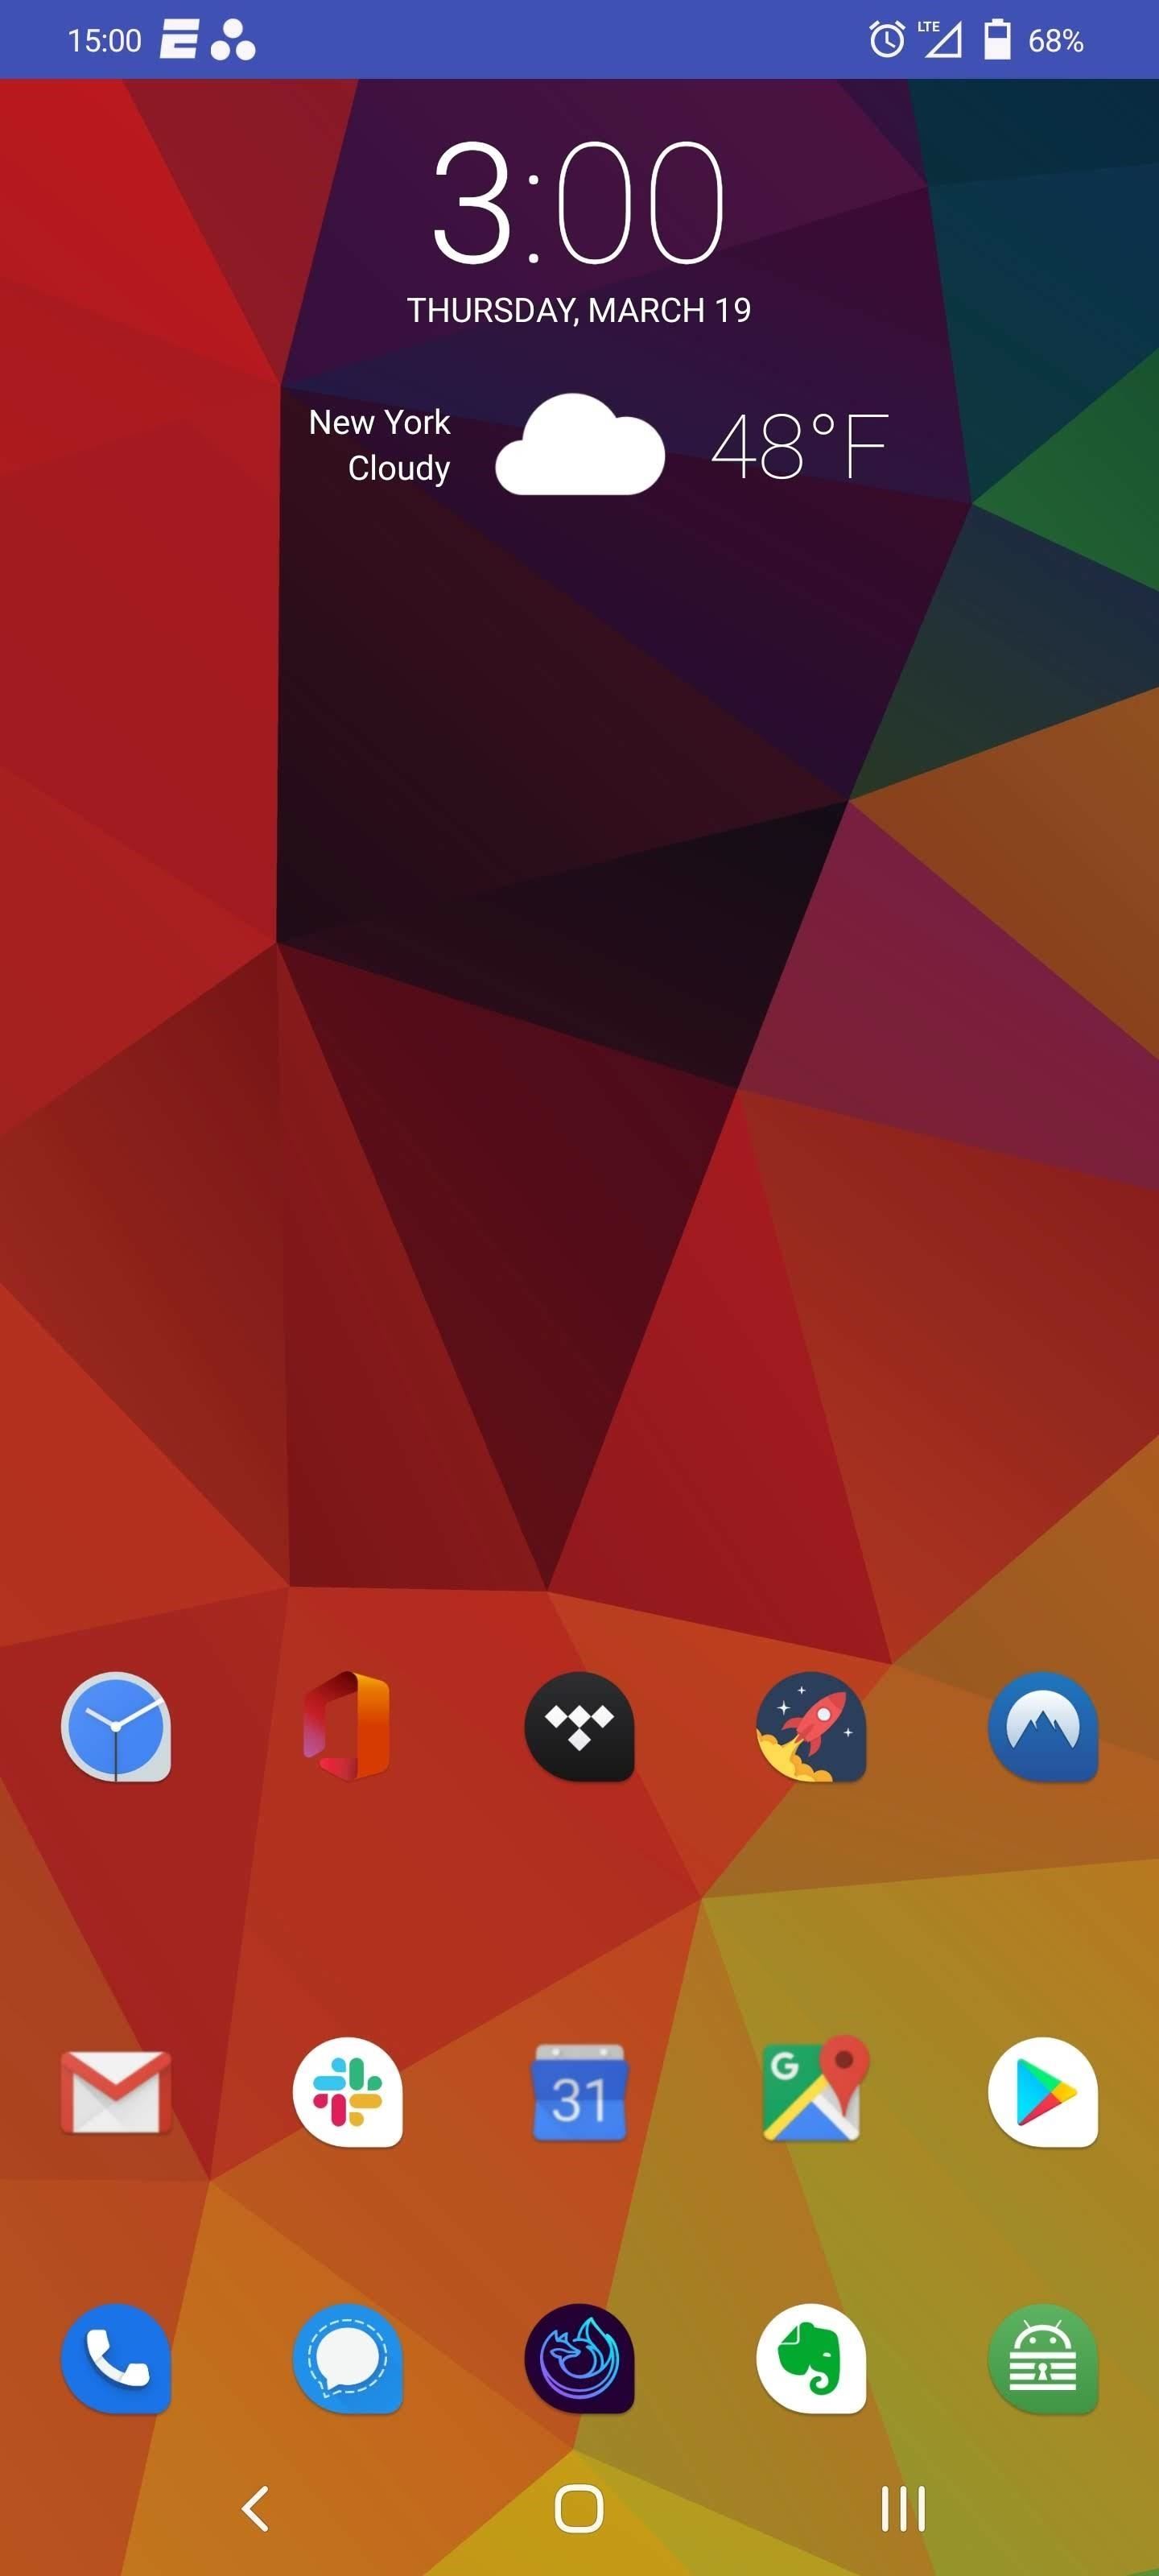 How to Completely Change the Status Bar on Any Android Without Rooting